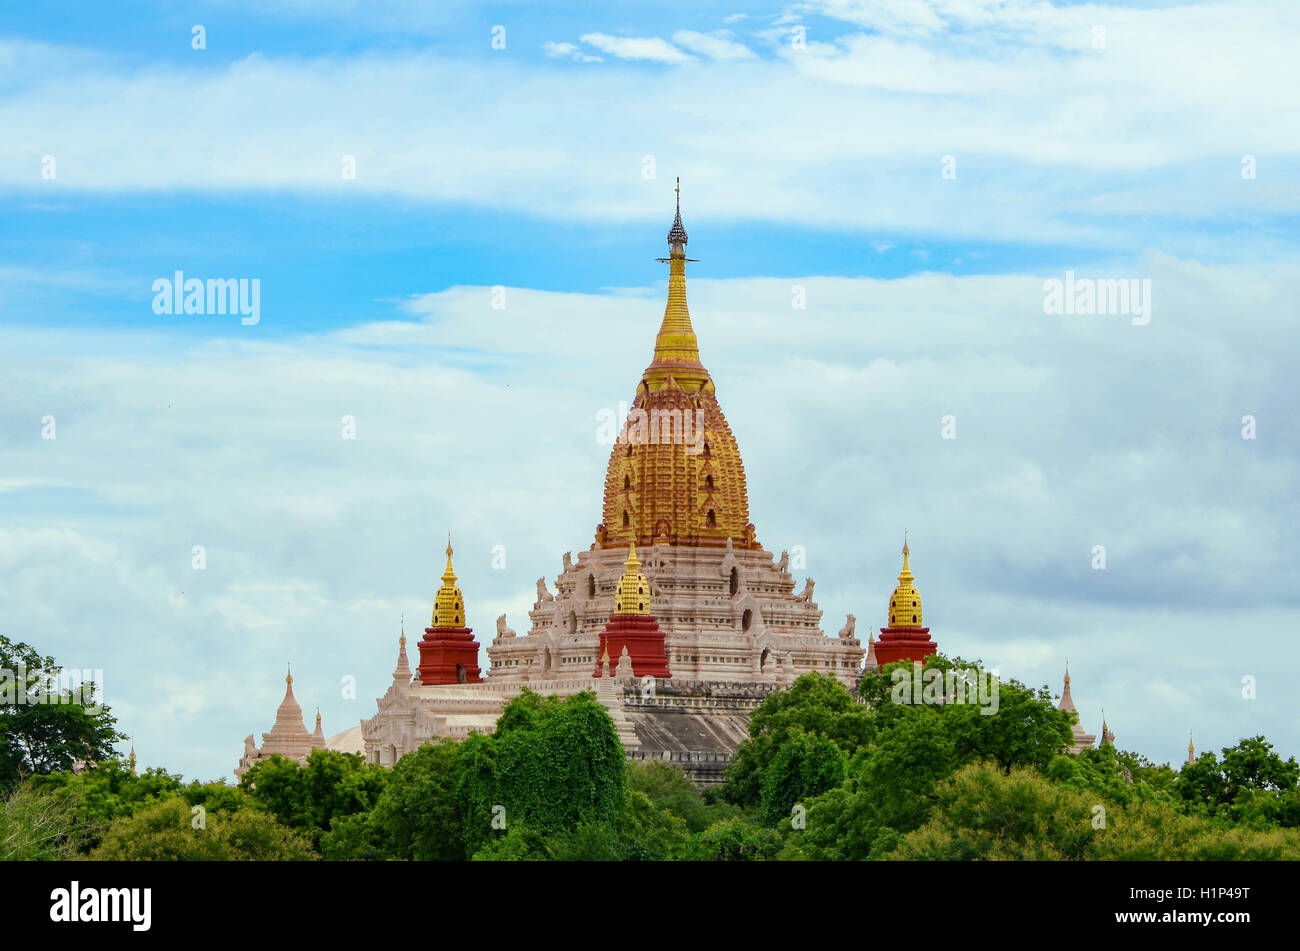 The Ananda Temple, located in Bagan, Myanmar. Is a Buddhist temple built in 1105 AD during the reign (1084 - 1113) of King Kyanz Stock Photo